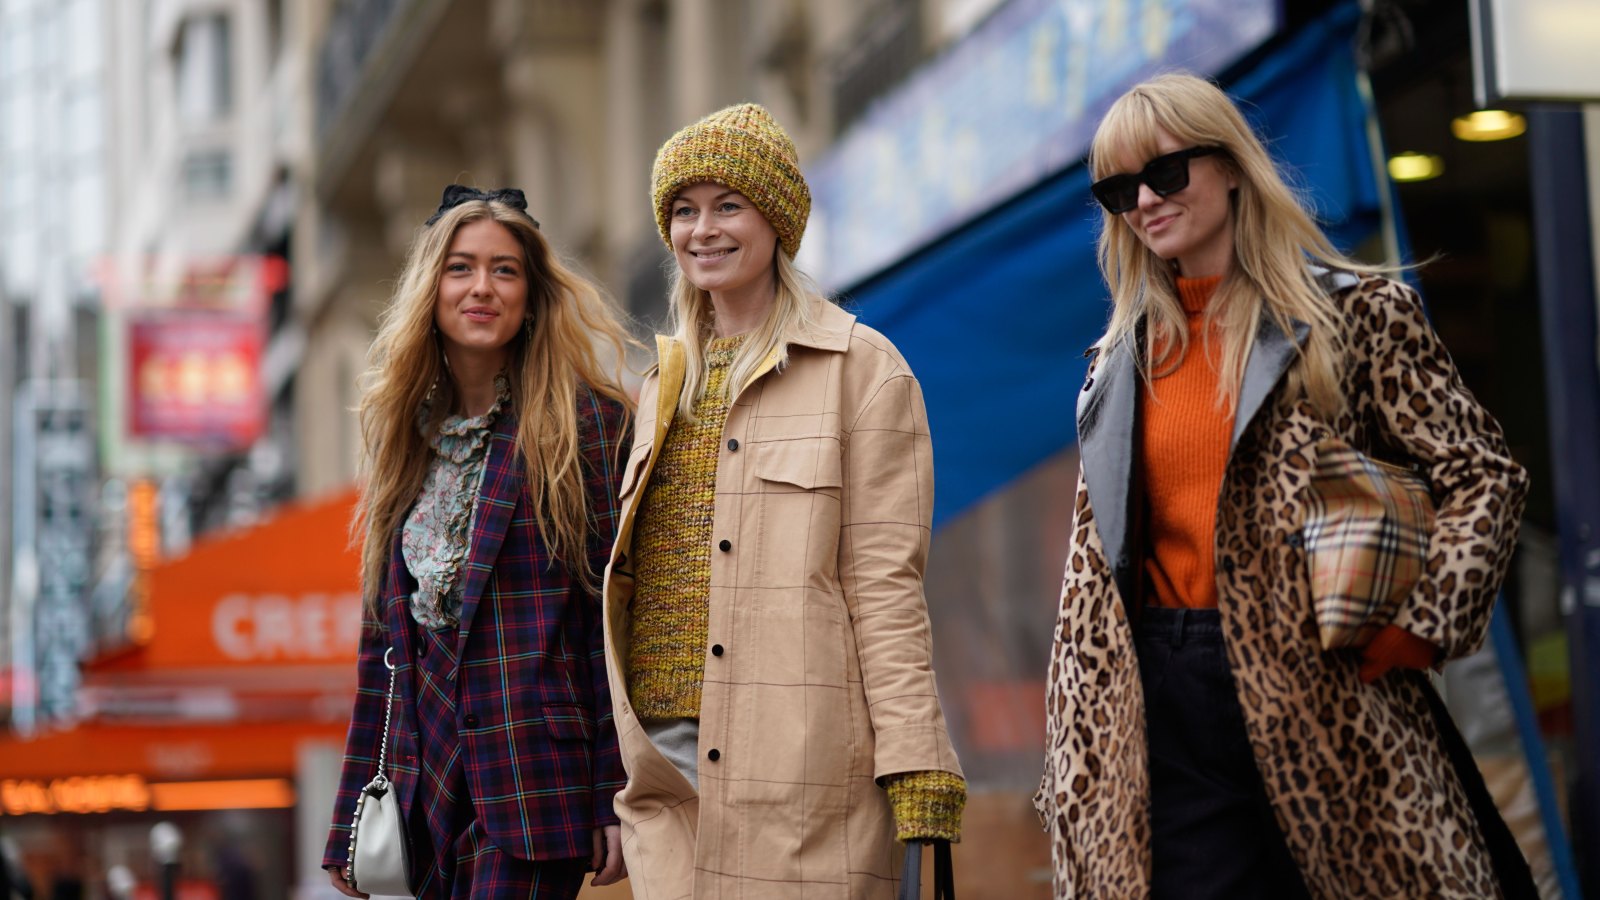 three women walking wearng coats. One woman is wearing a khaki coat, another is wearing a plaid blazer coat another is wearing a leopard print coat. All are smiling.